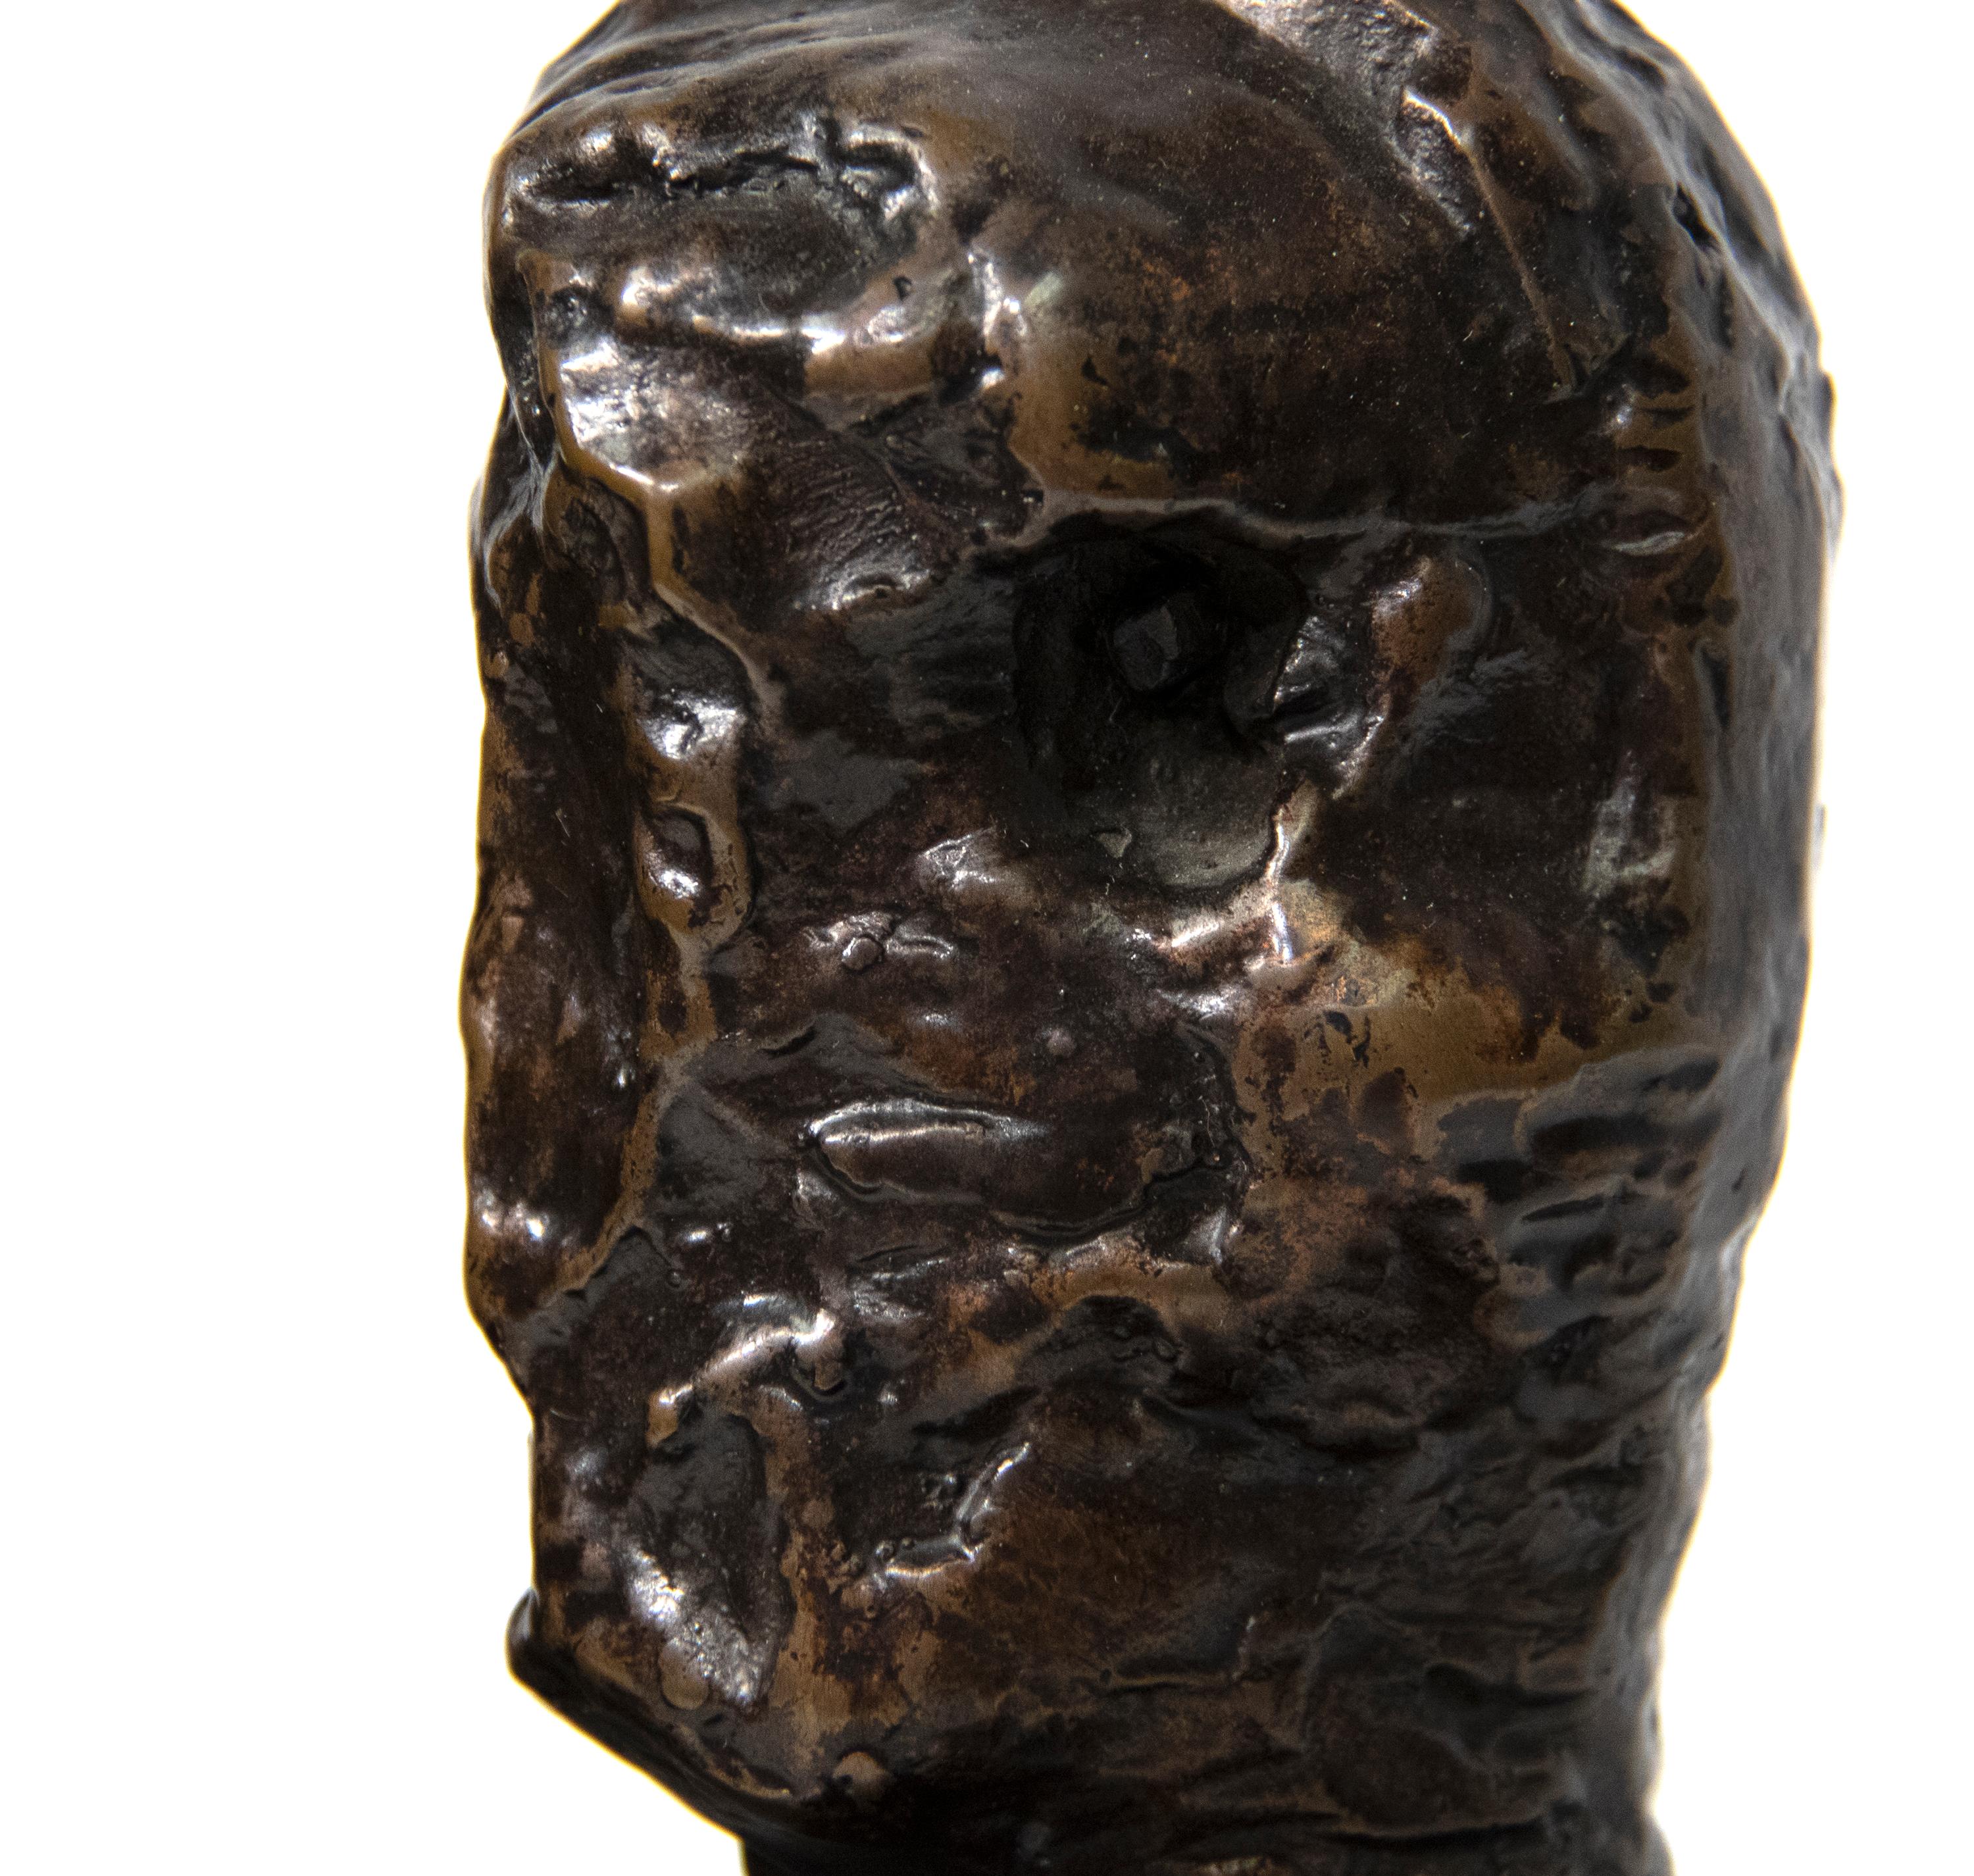 Emperor's Heads - Gold Figurative Sculpture by Henry Moore